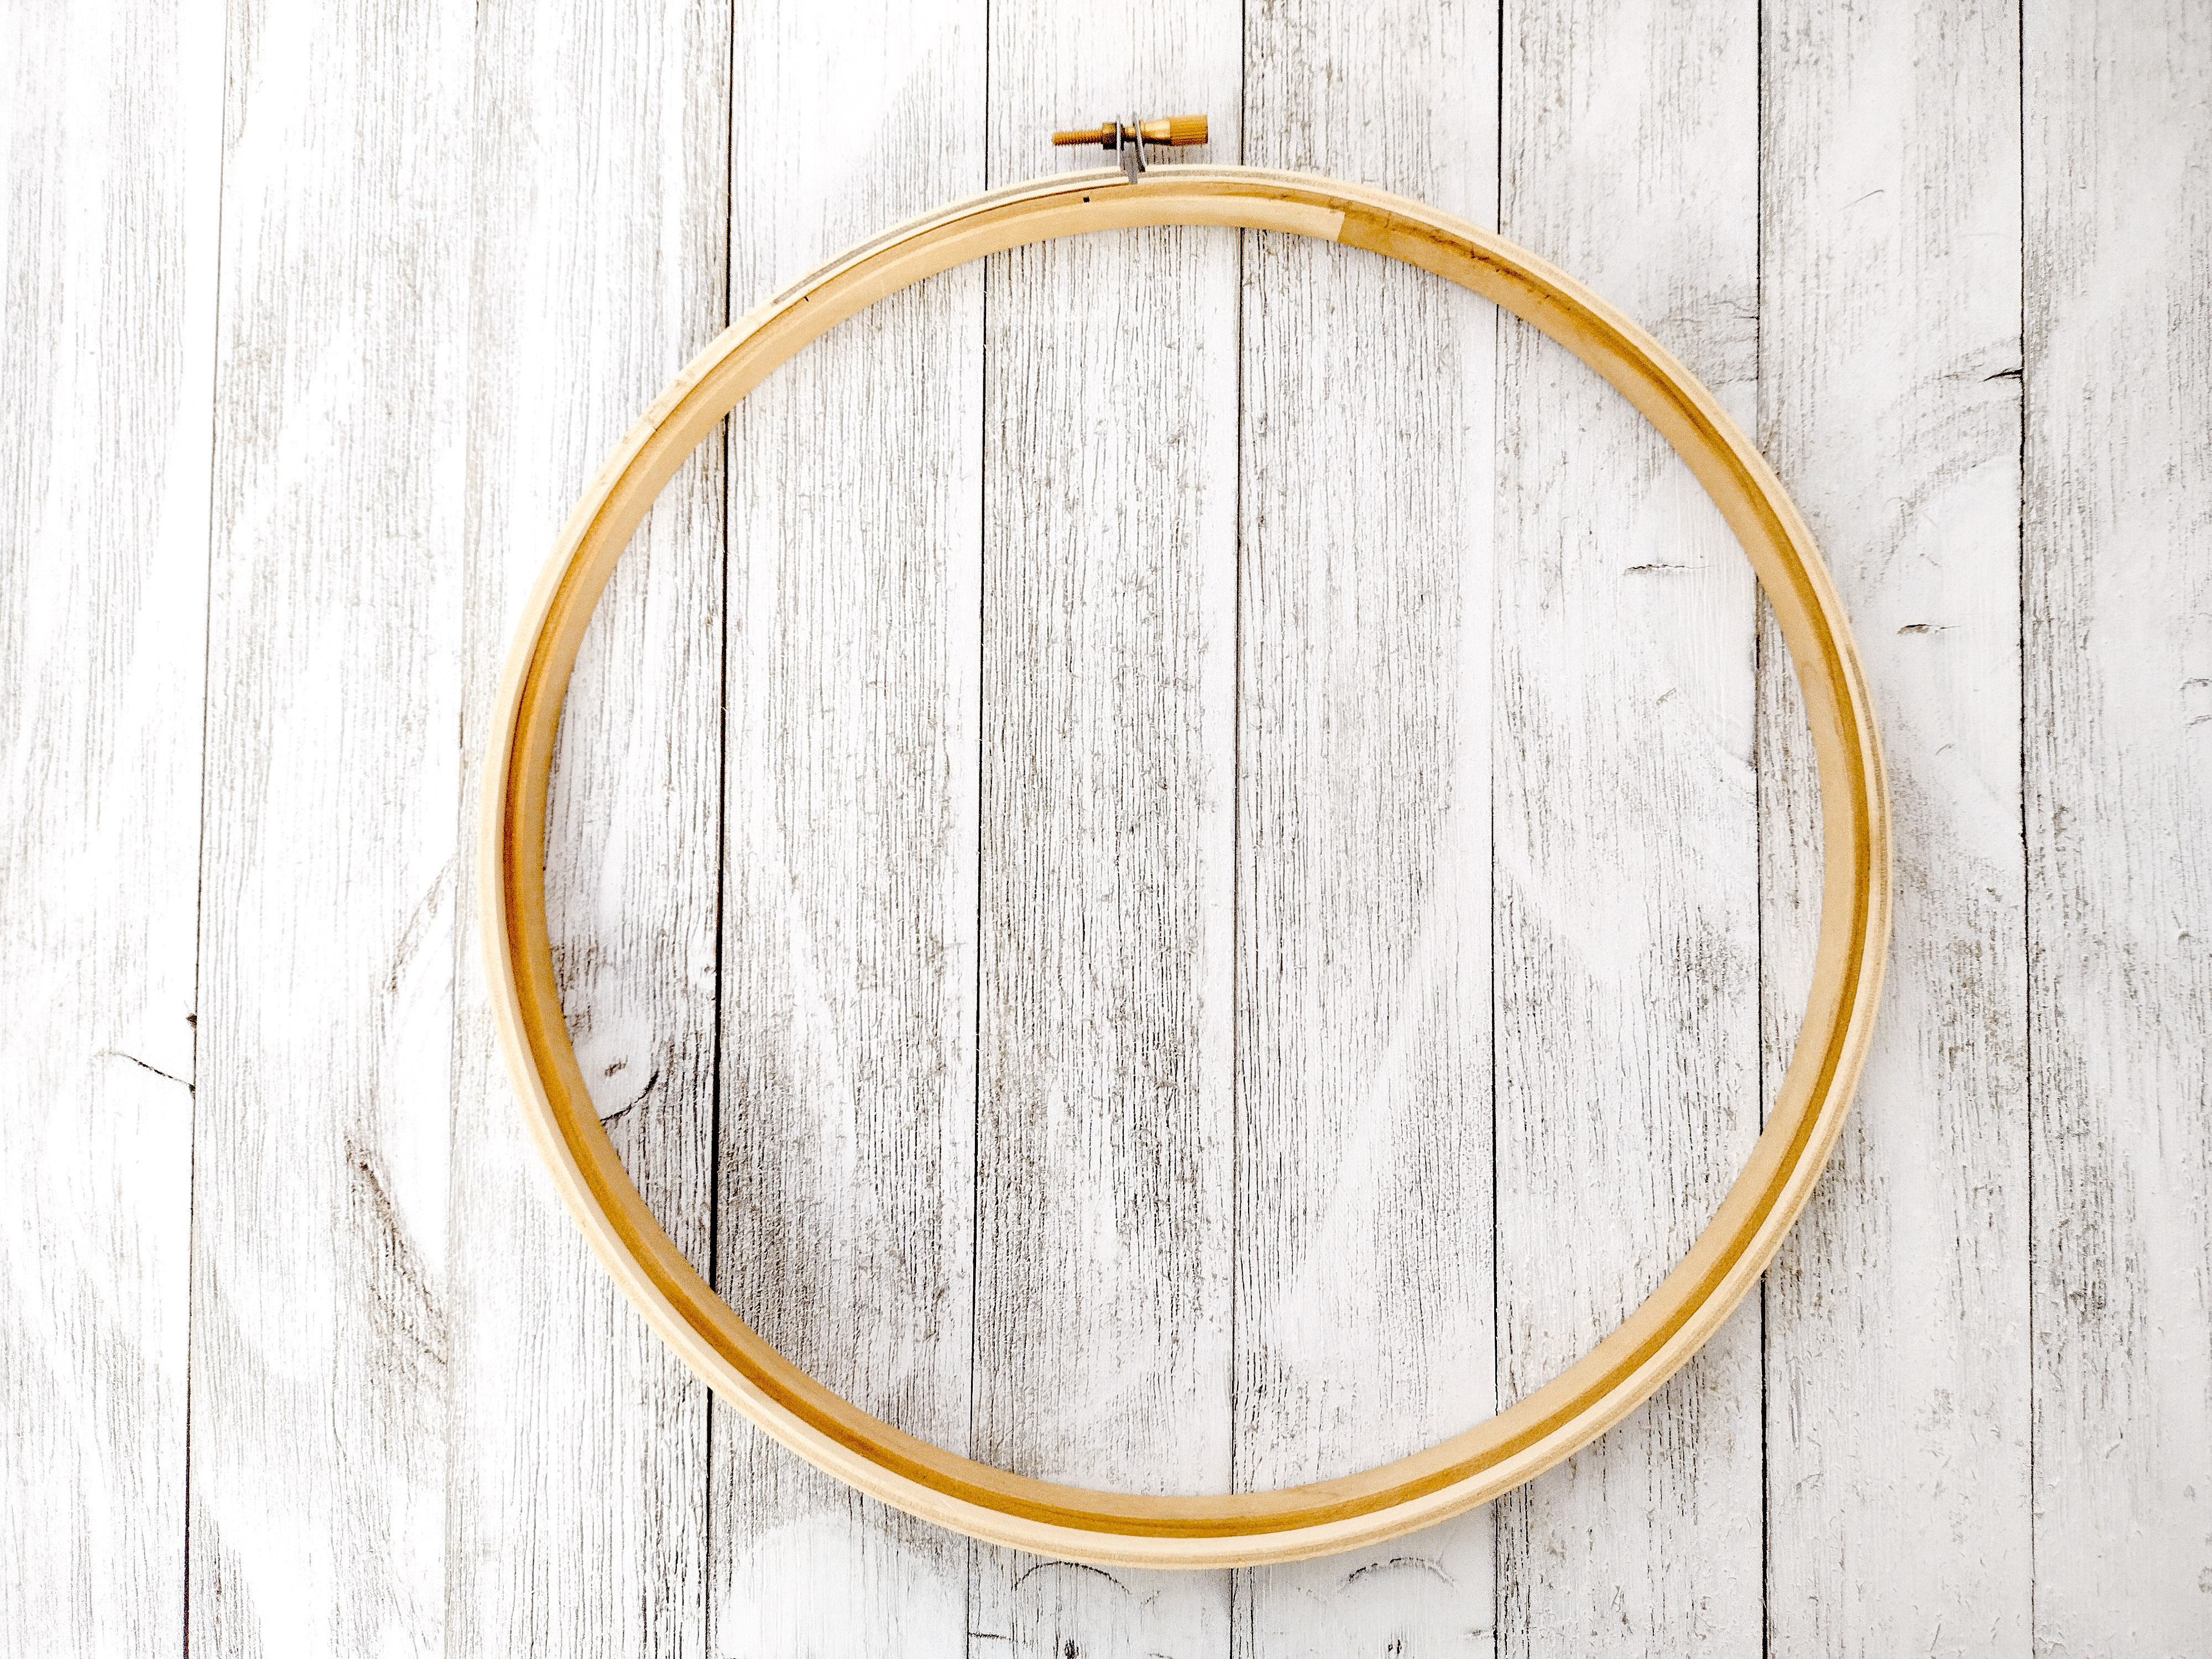 embroidery hoop. this is to hold your fabric while you sew